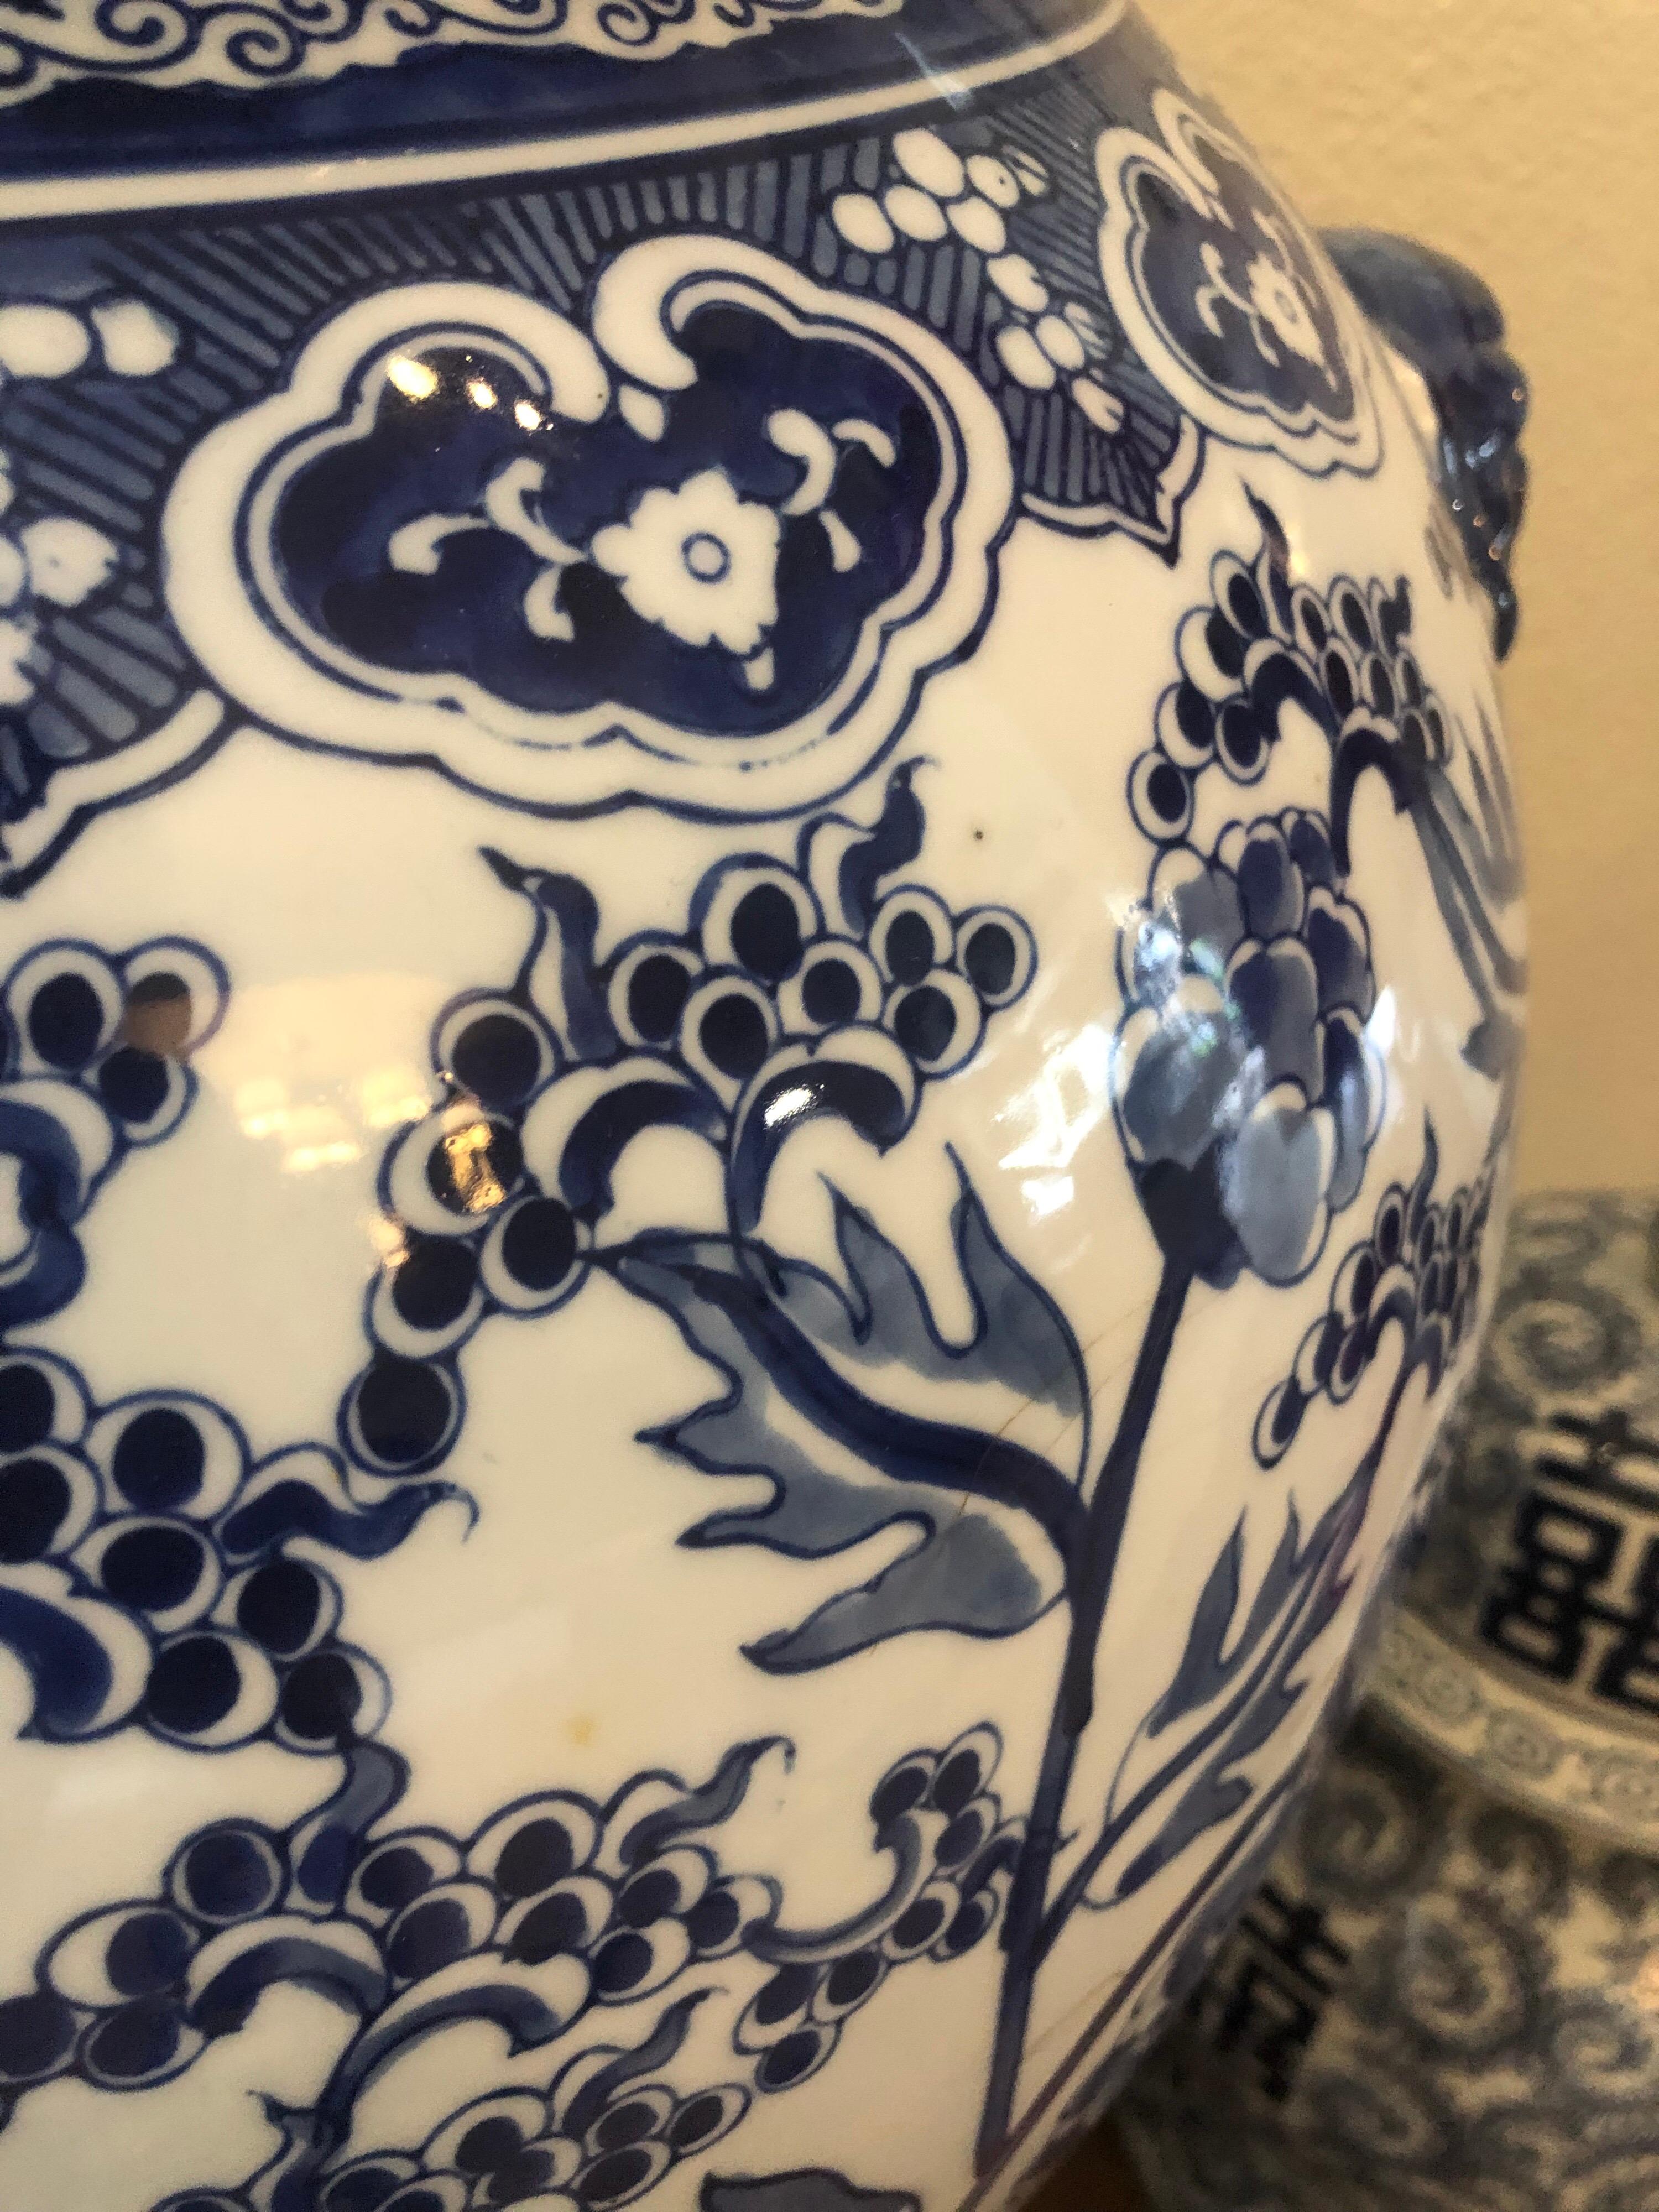 Hand-Painted Big Floor 20th Century Blue and White Chinese Porcelain Vases